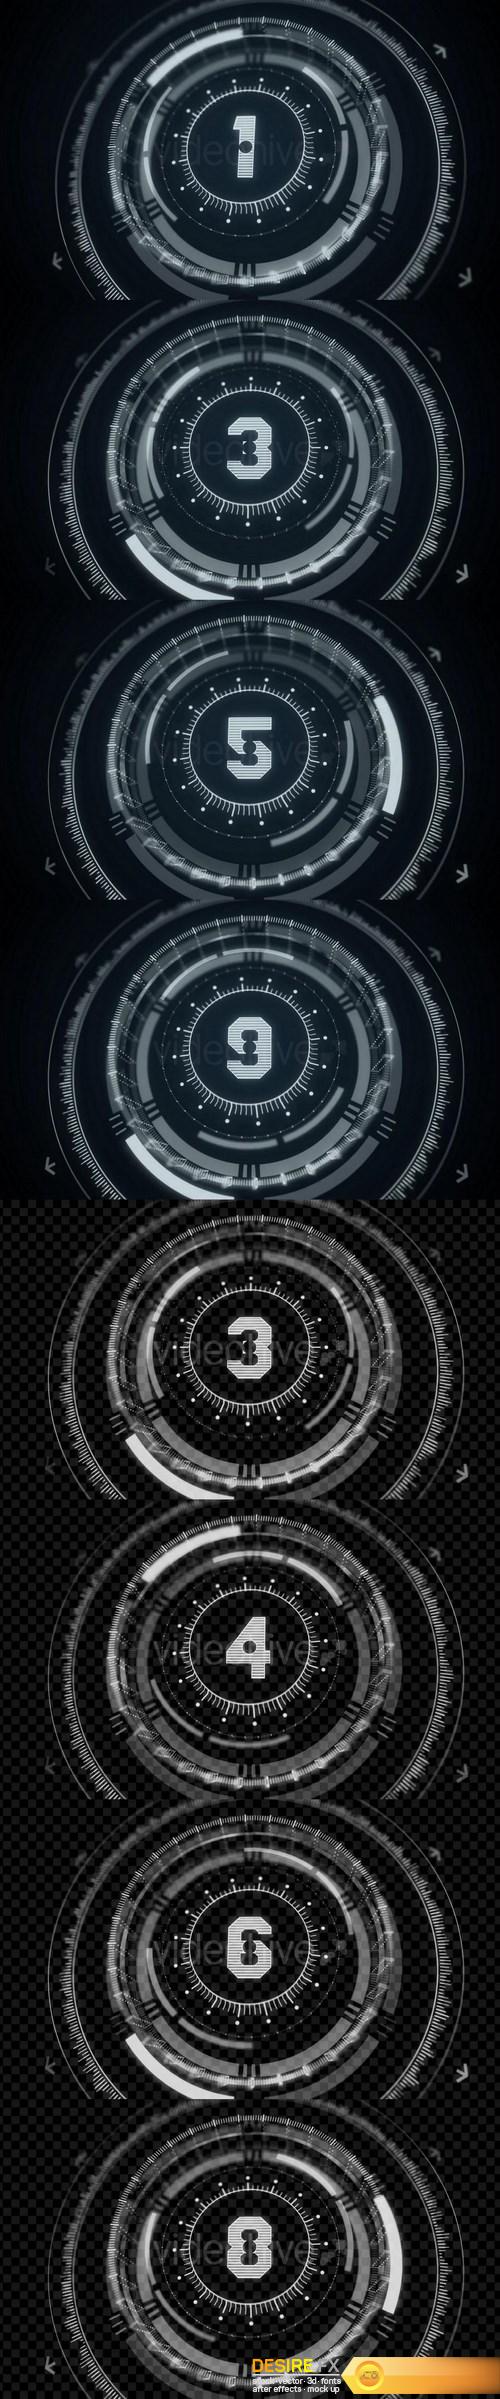 videohive-19595704-counter-from-1-to-10-with-futuristic-hud-elements